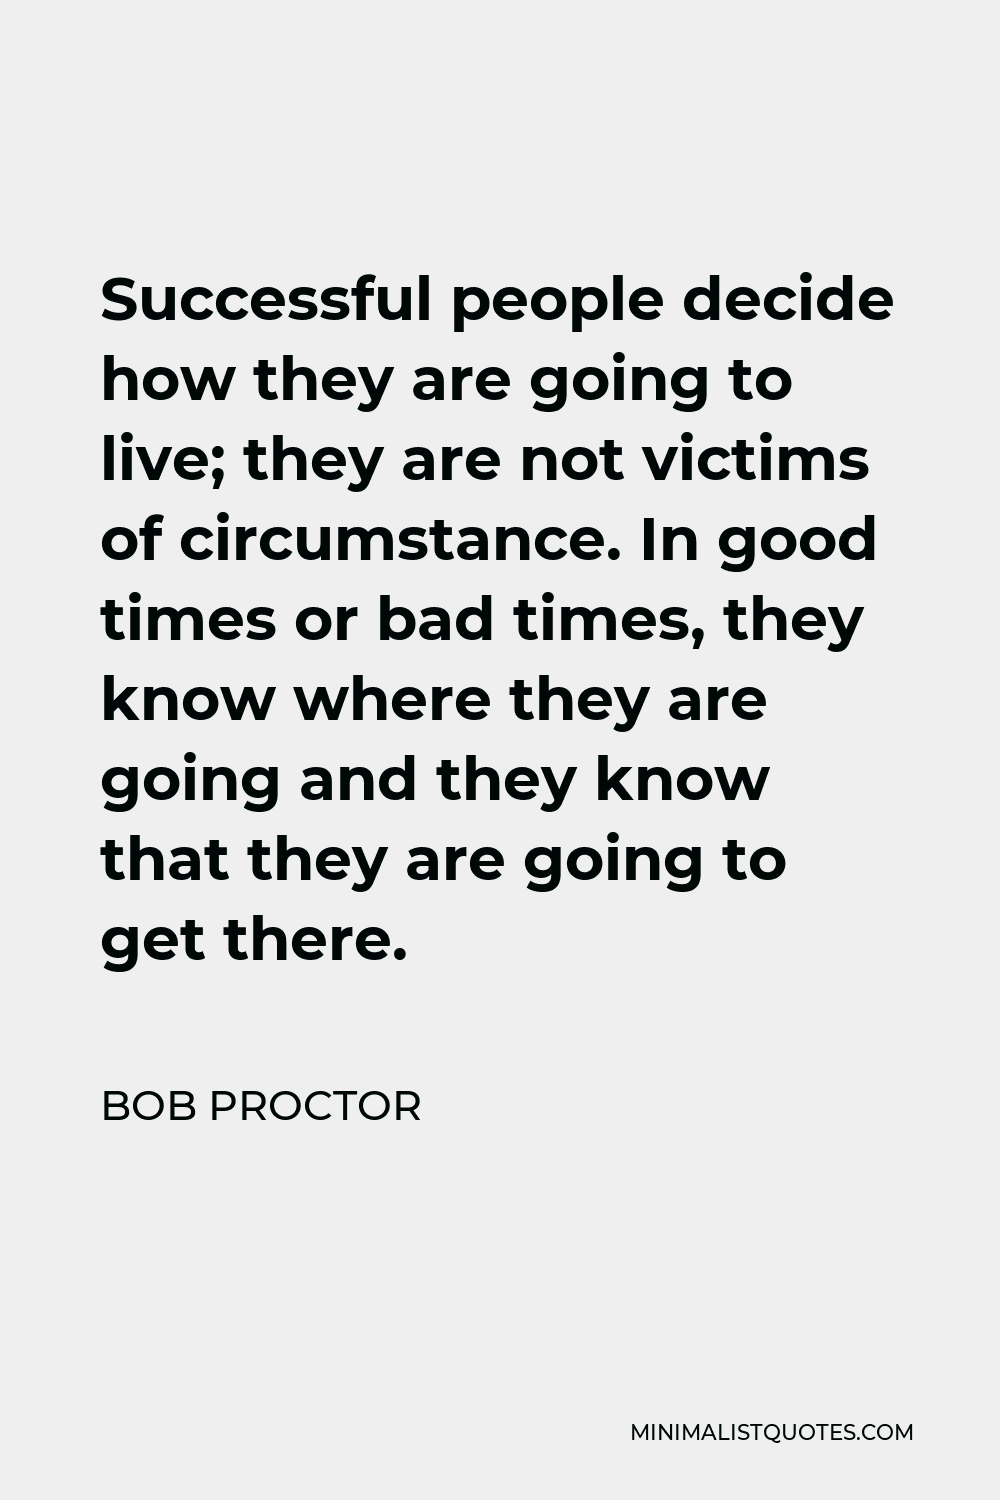 Bob Proctor Quote - Successful people decide how they are going to live; they are not victims of circumstance. In good times or bad times, they know where they are going and they know that they are going to get there.